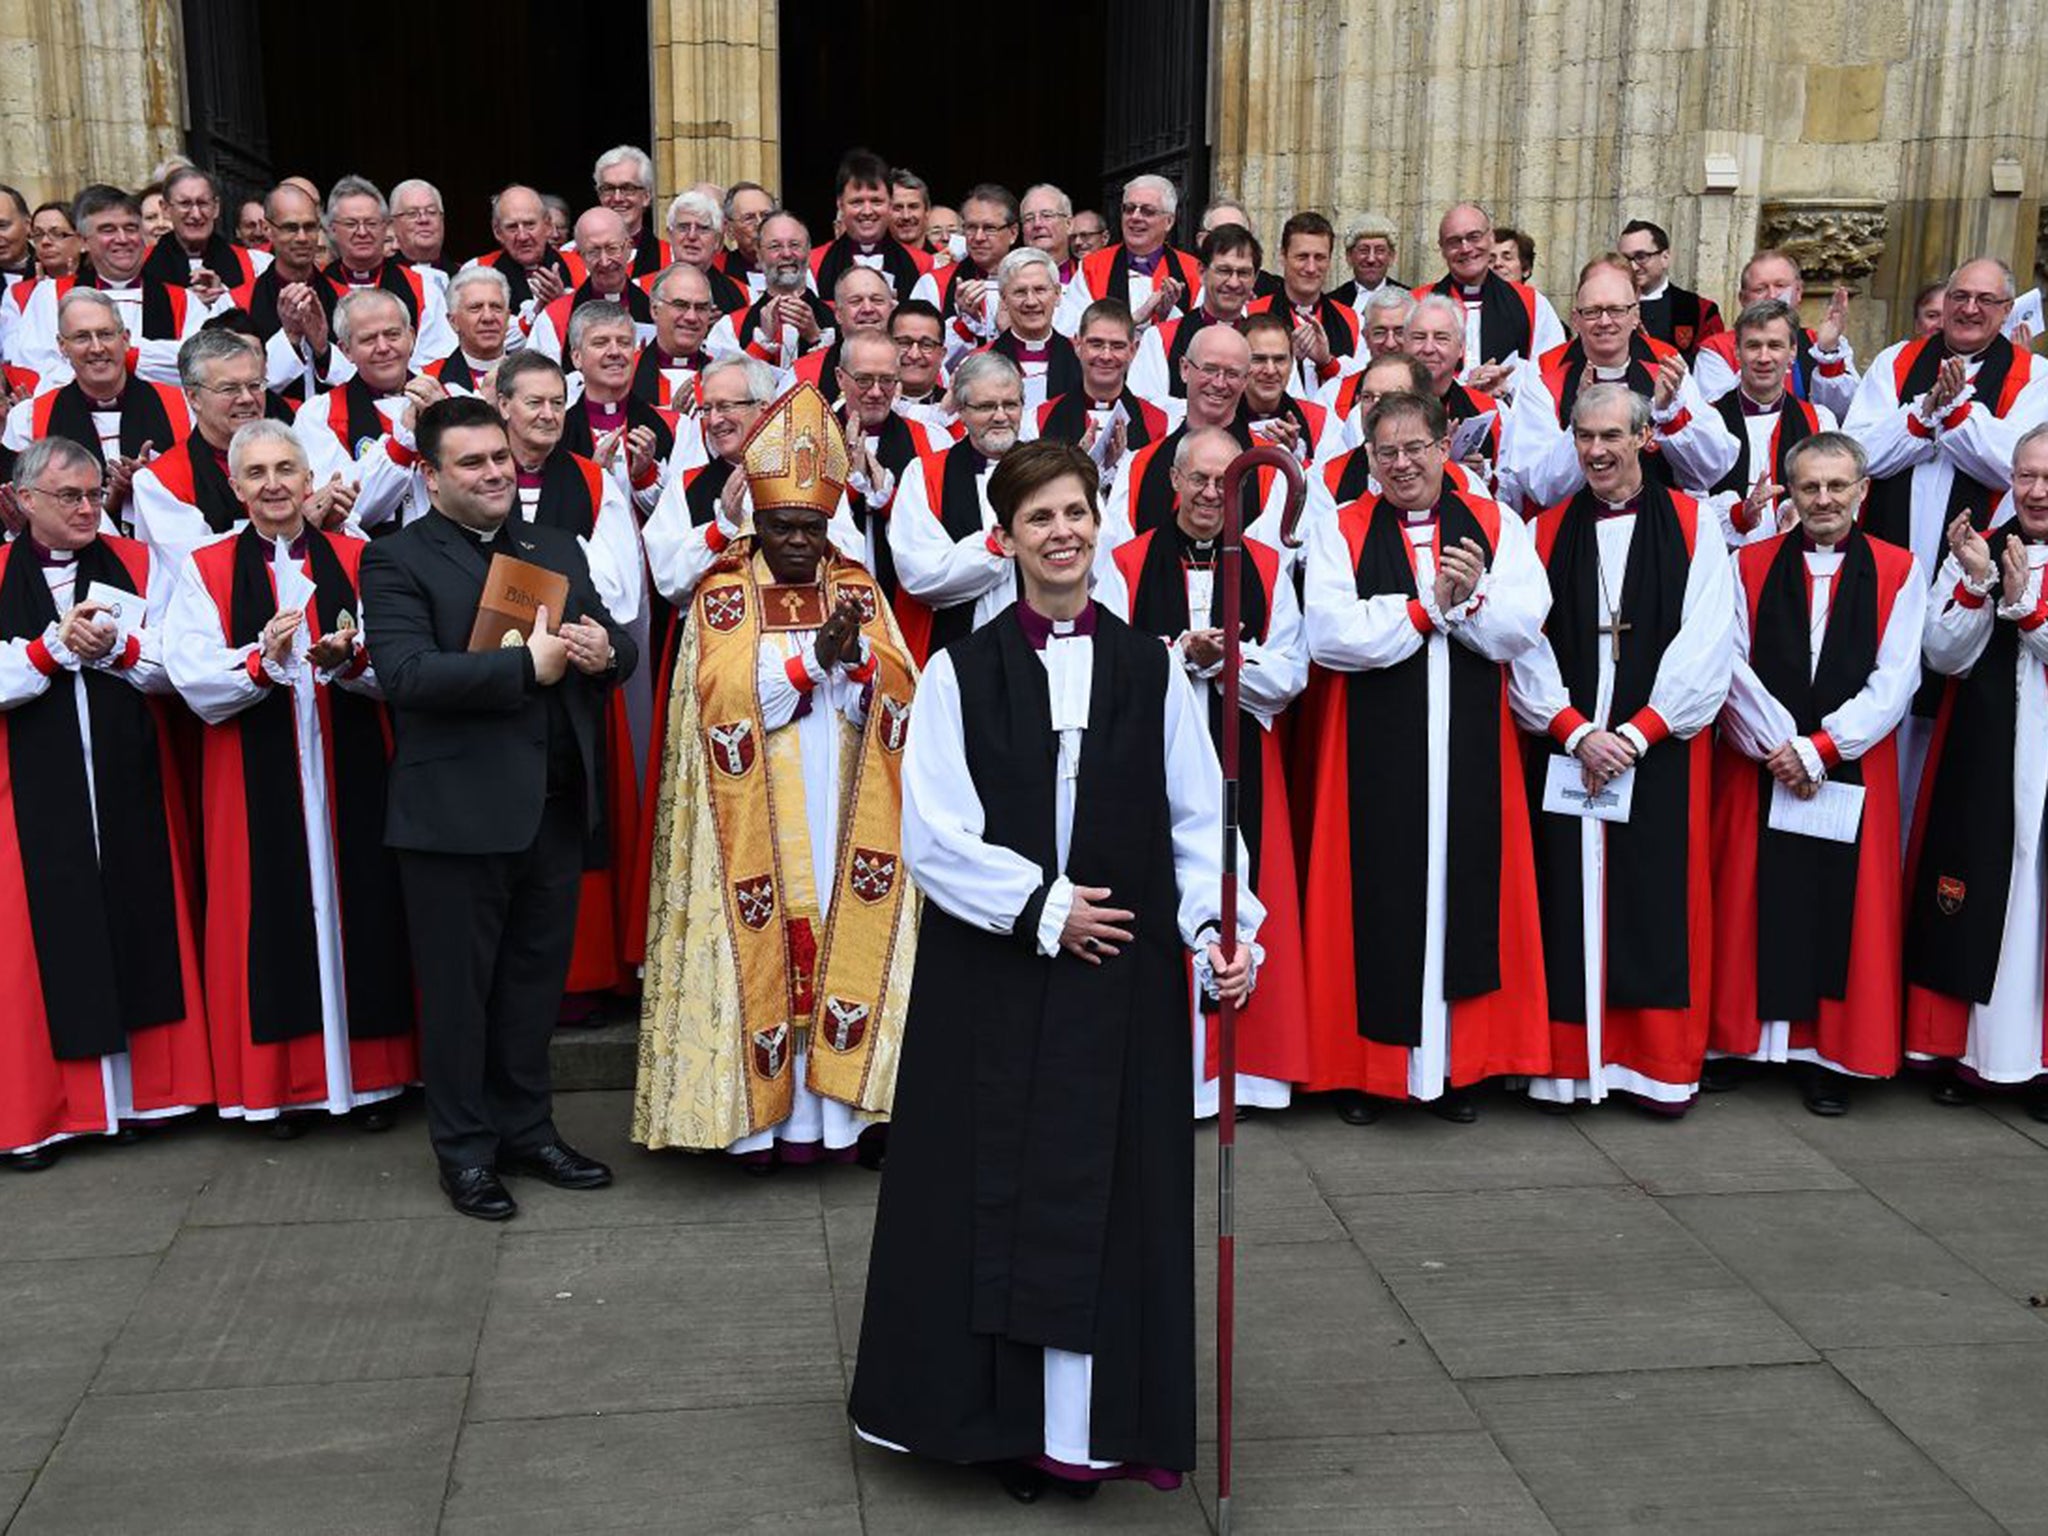 The Rev Libby Lane is all smiles after being ordained as the eighth Bishop of Stockport in a service at York Minster (AFP)